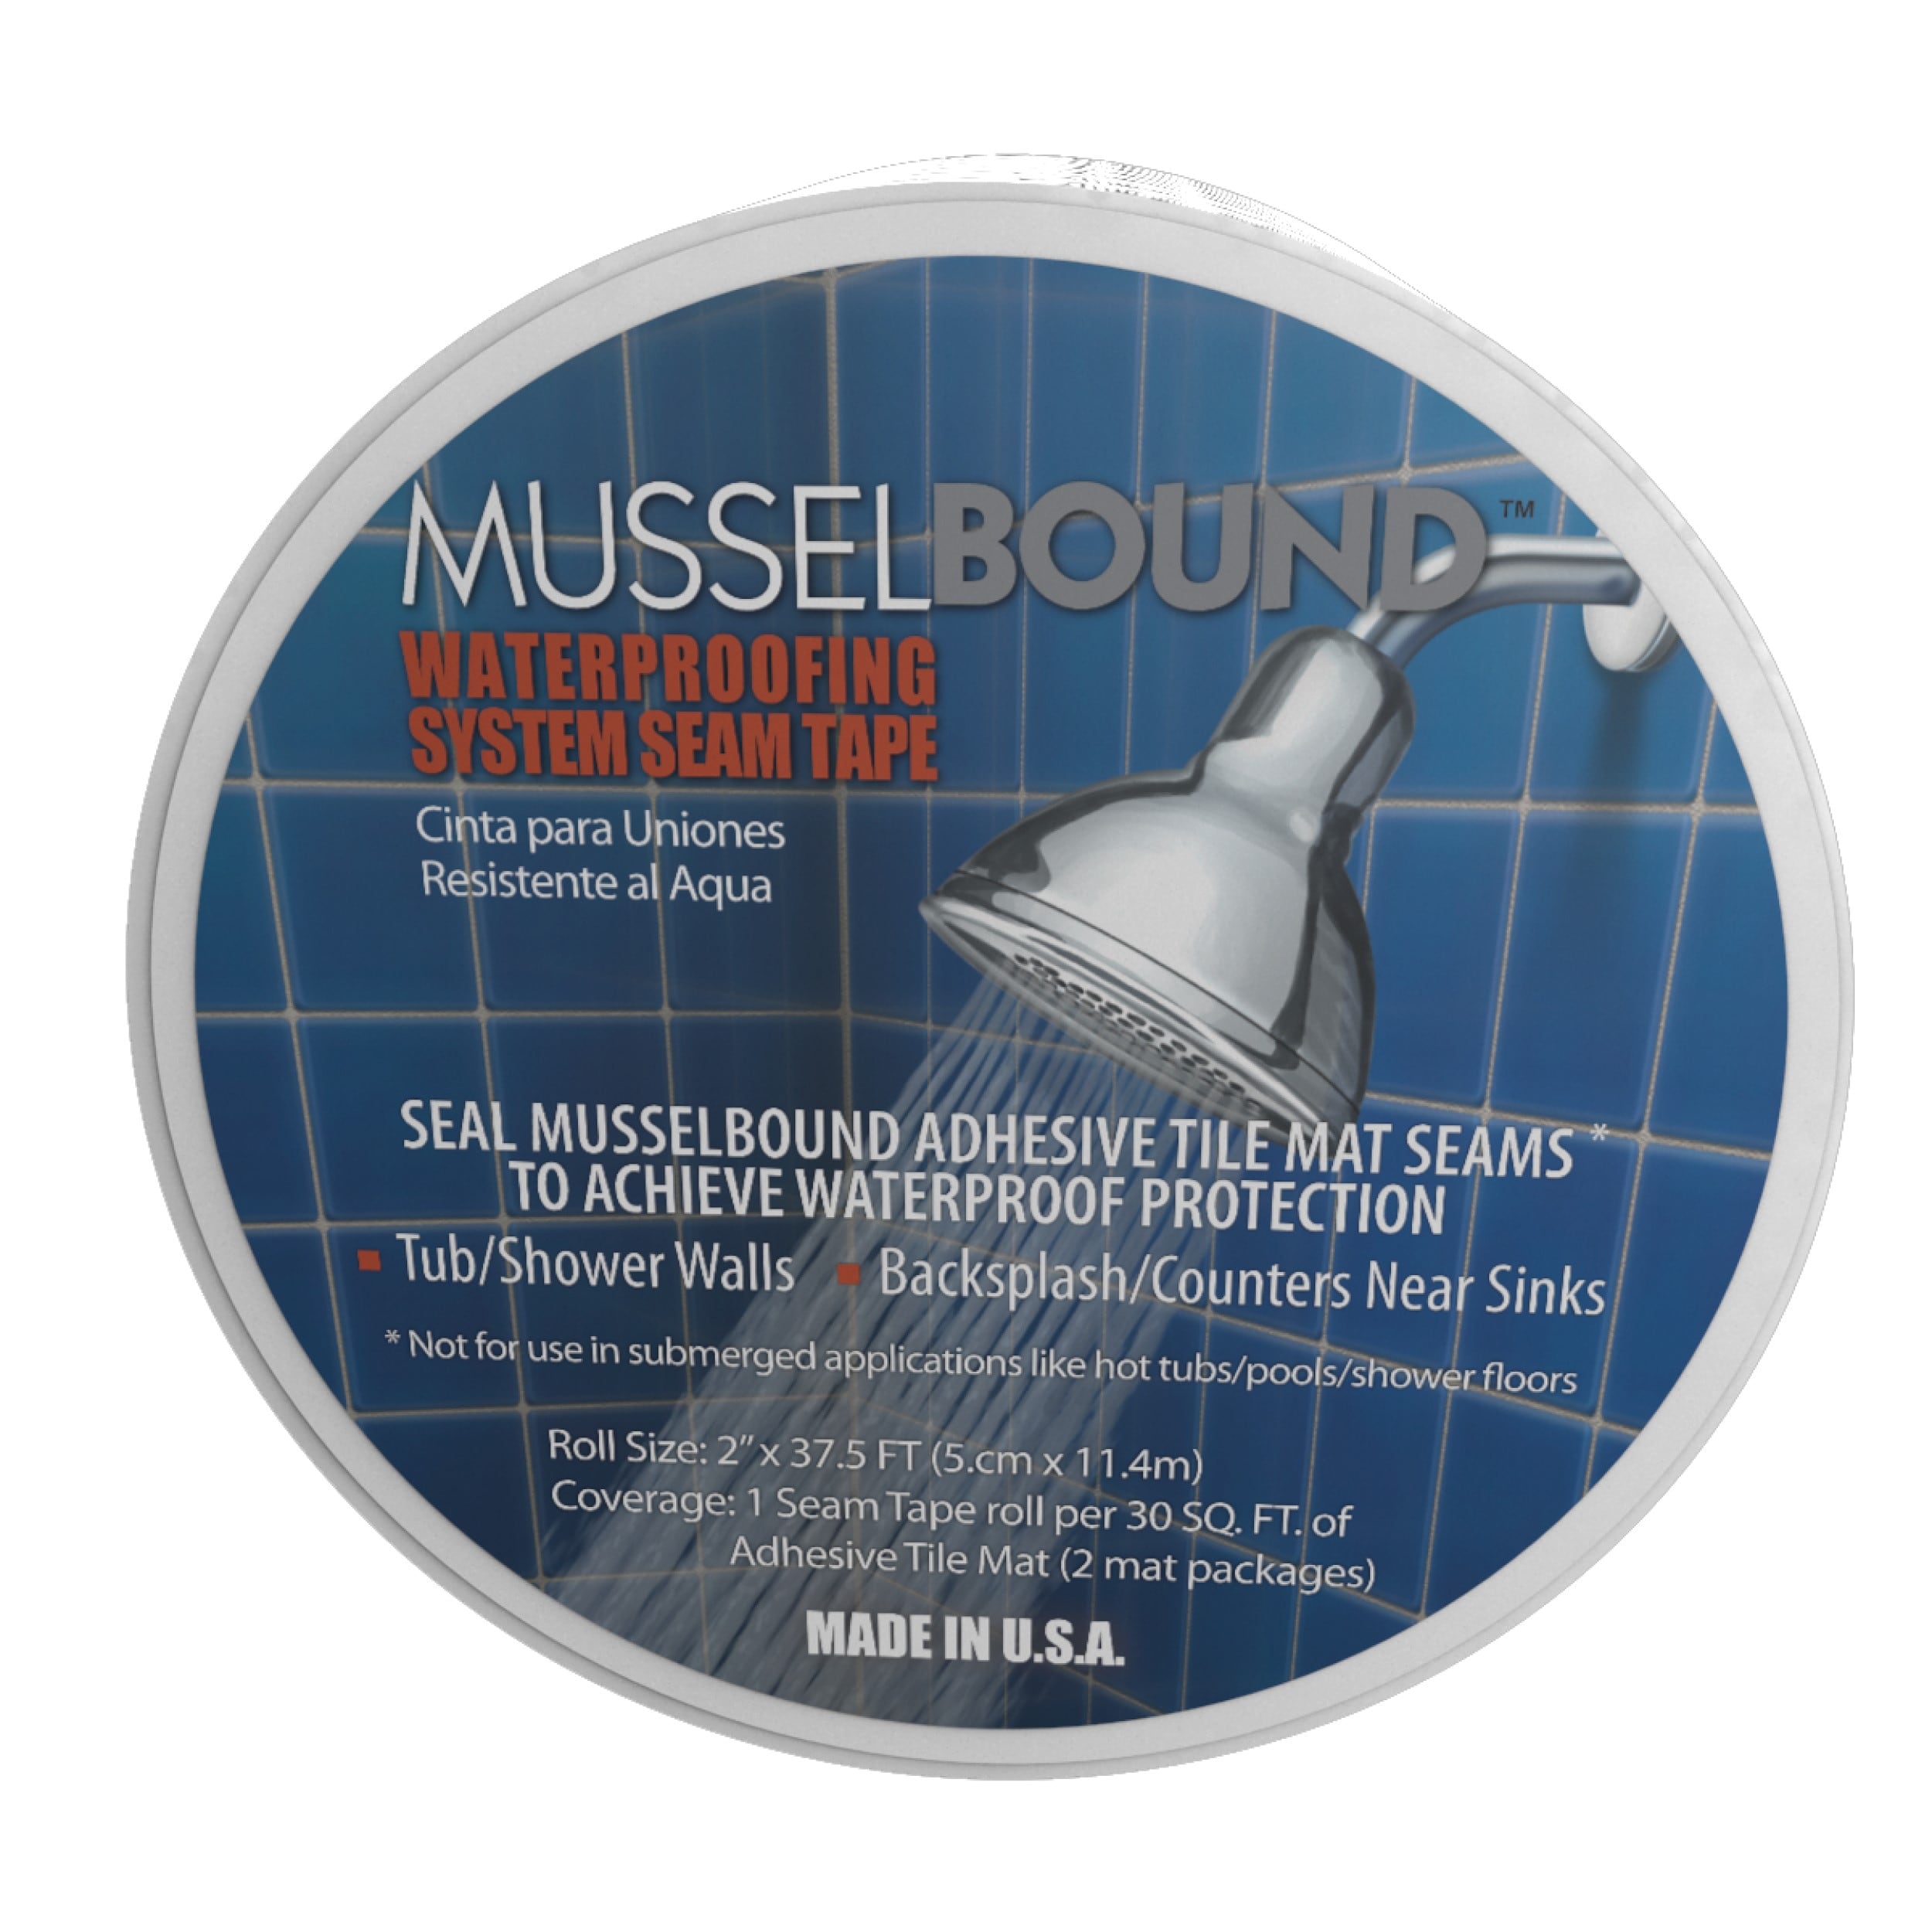 MUSSELBOUND, LLC MB ATM 15-Square Feet Adhesive Tile Mat at Sutherlands